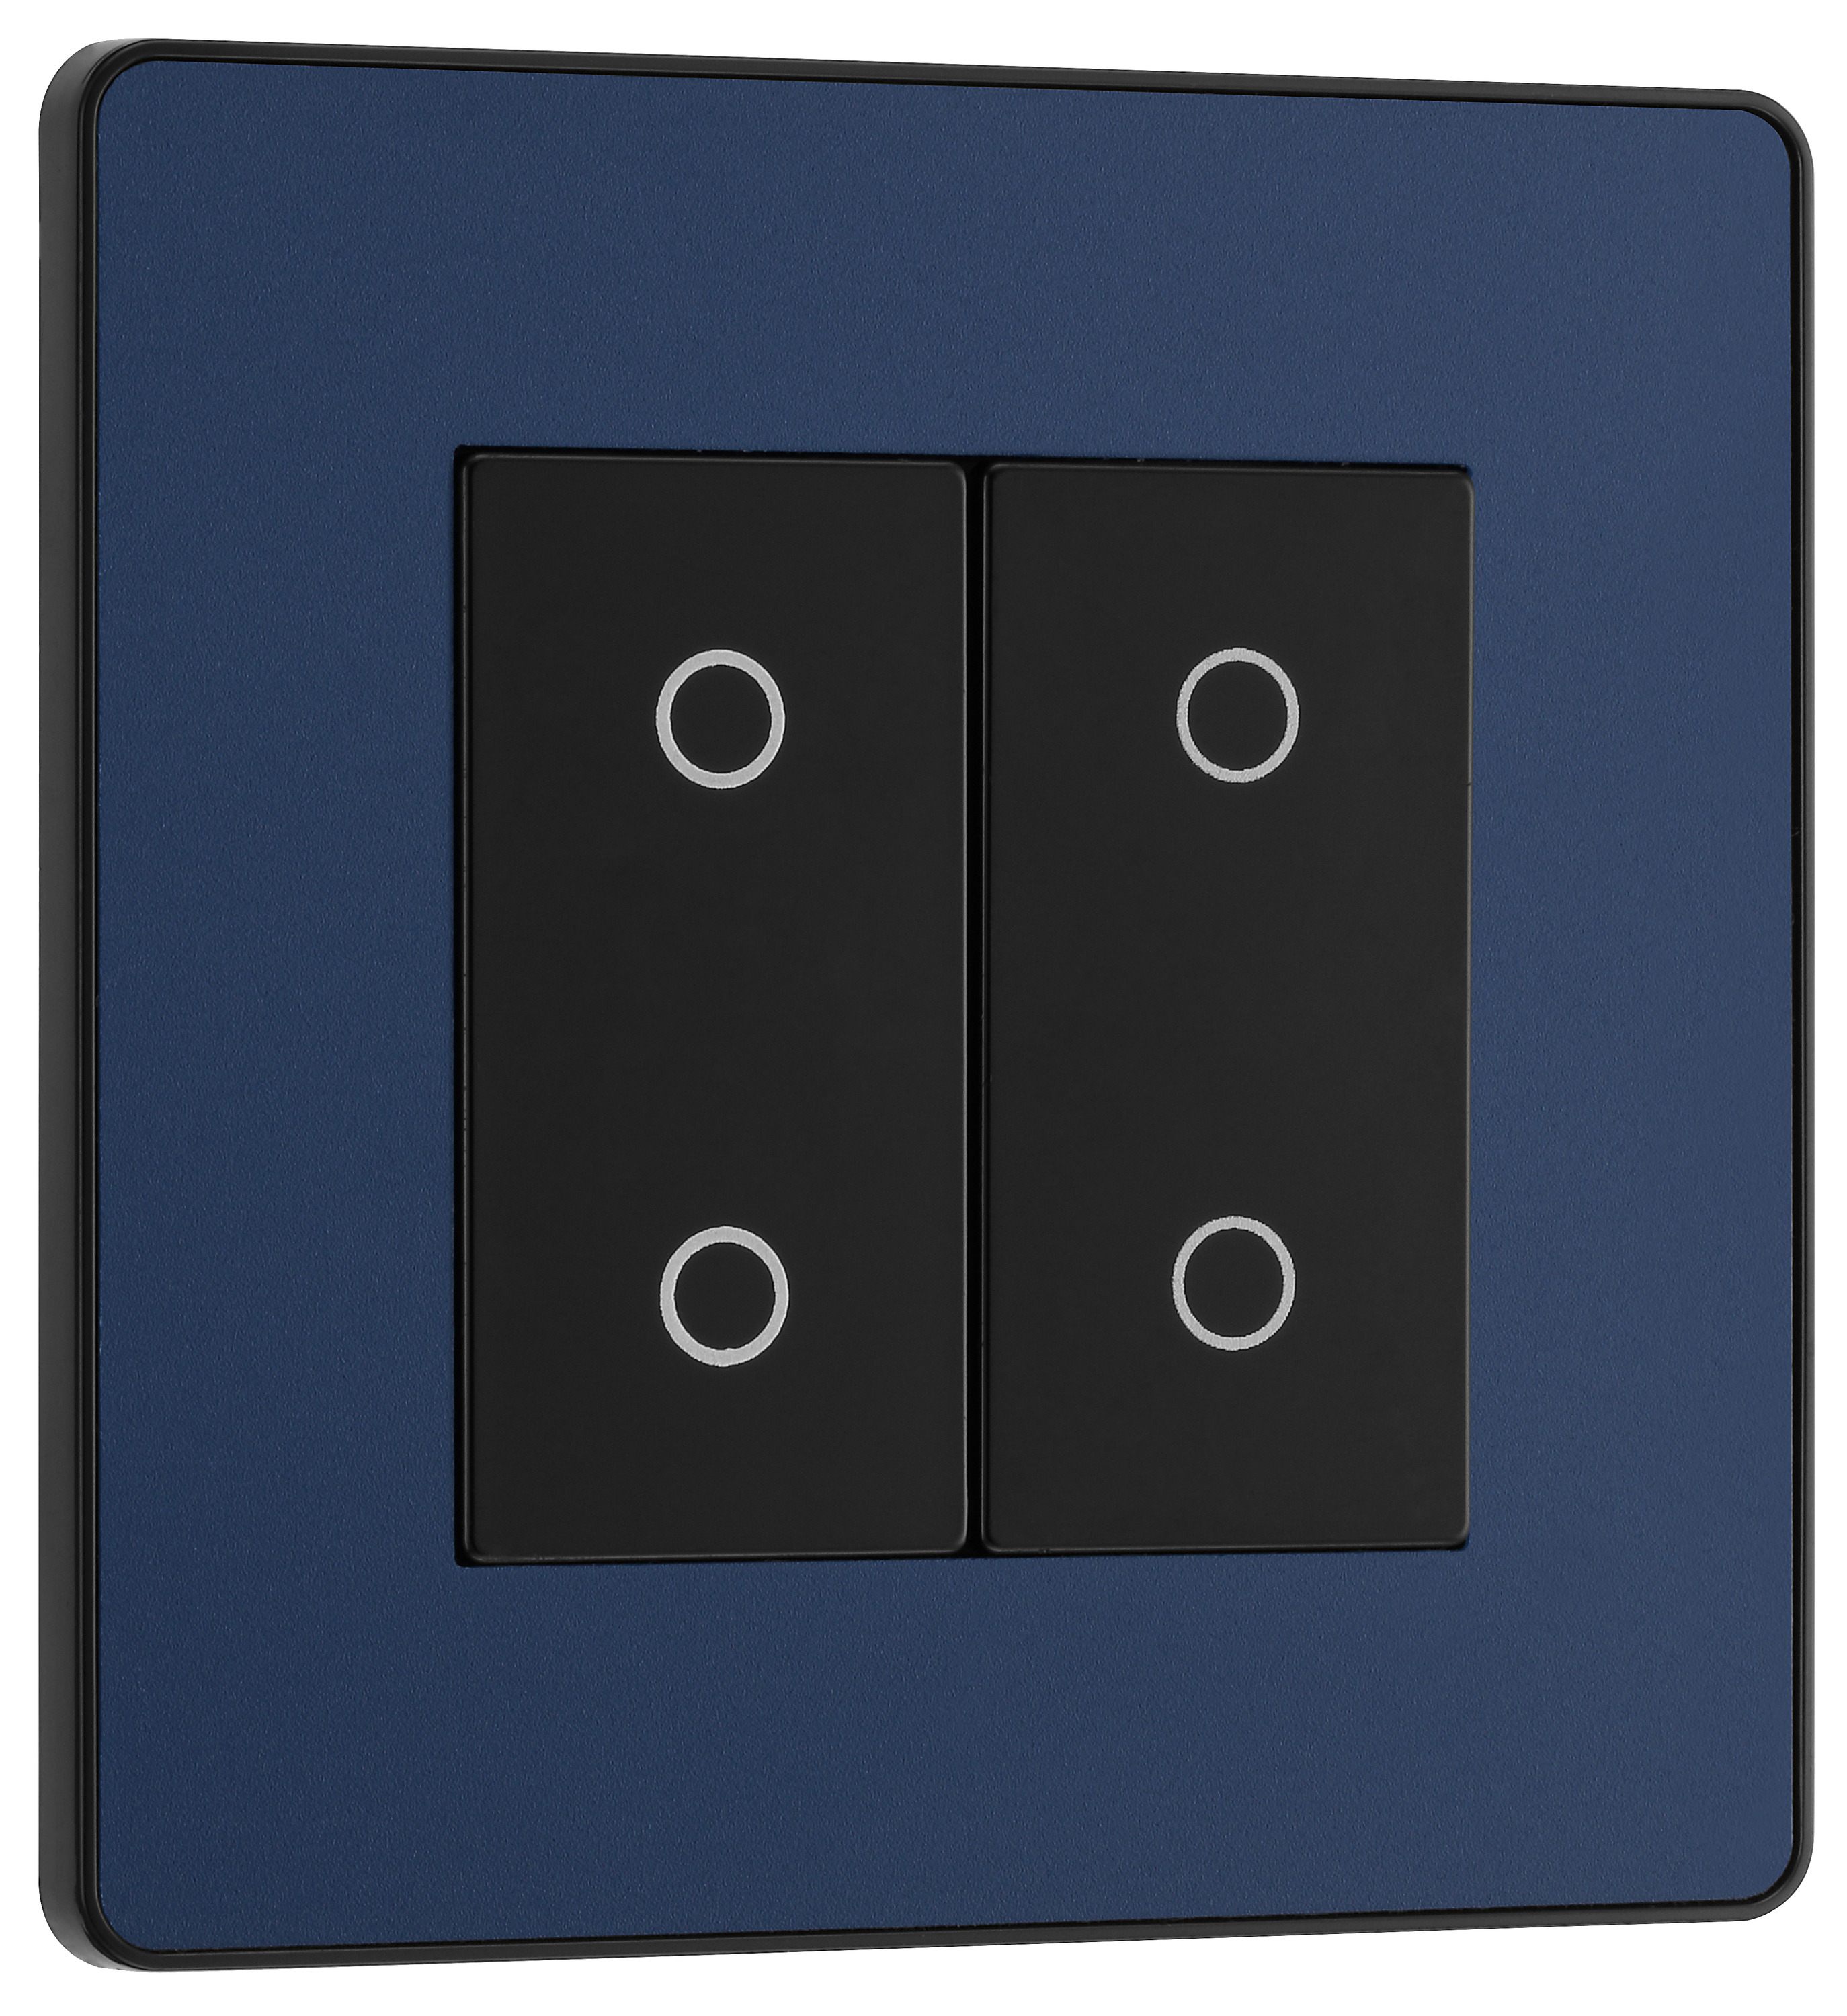 Image of BG Evolve Secondary 2 Way Double Touch Dimmer Switch - 200W